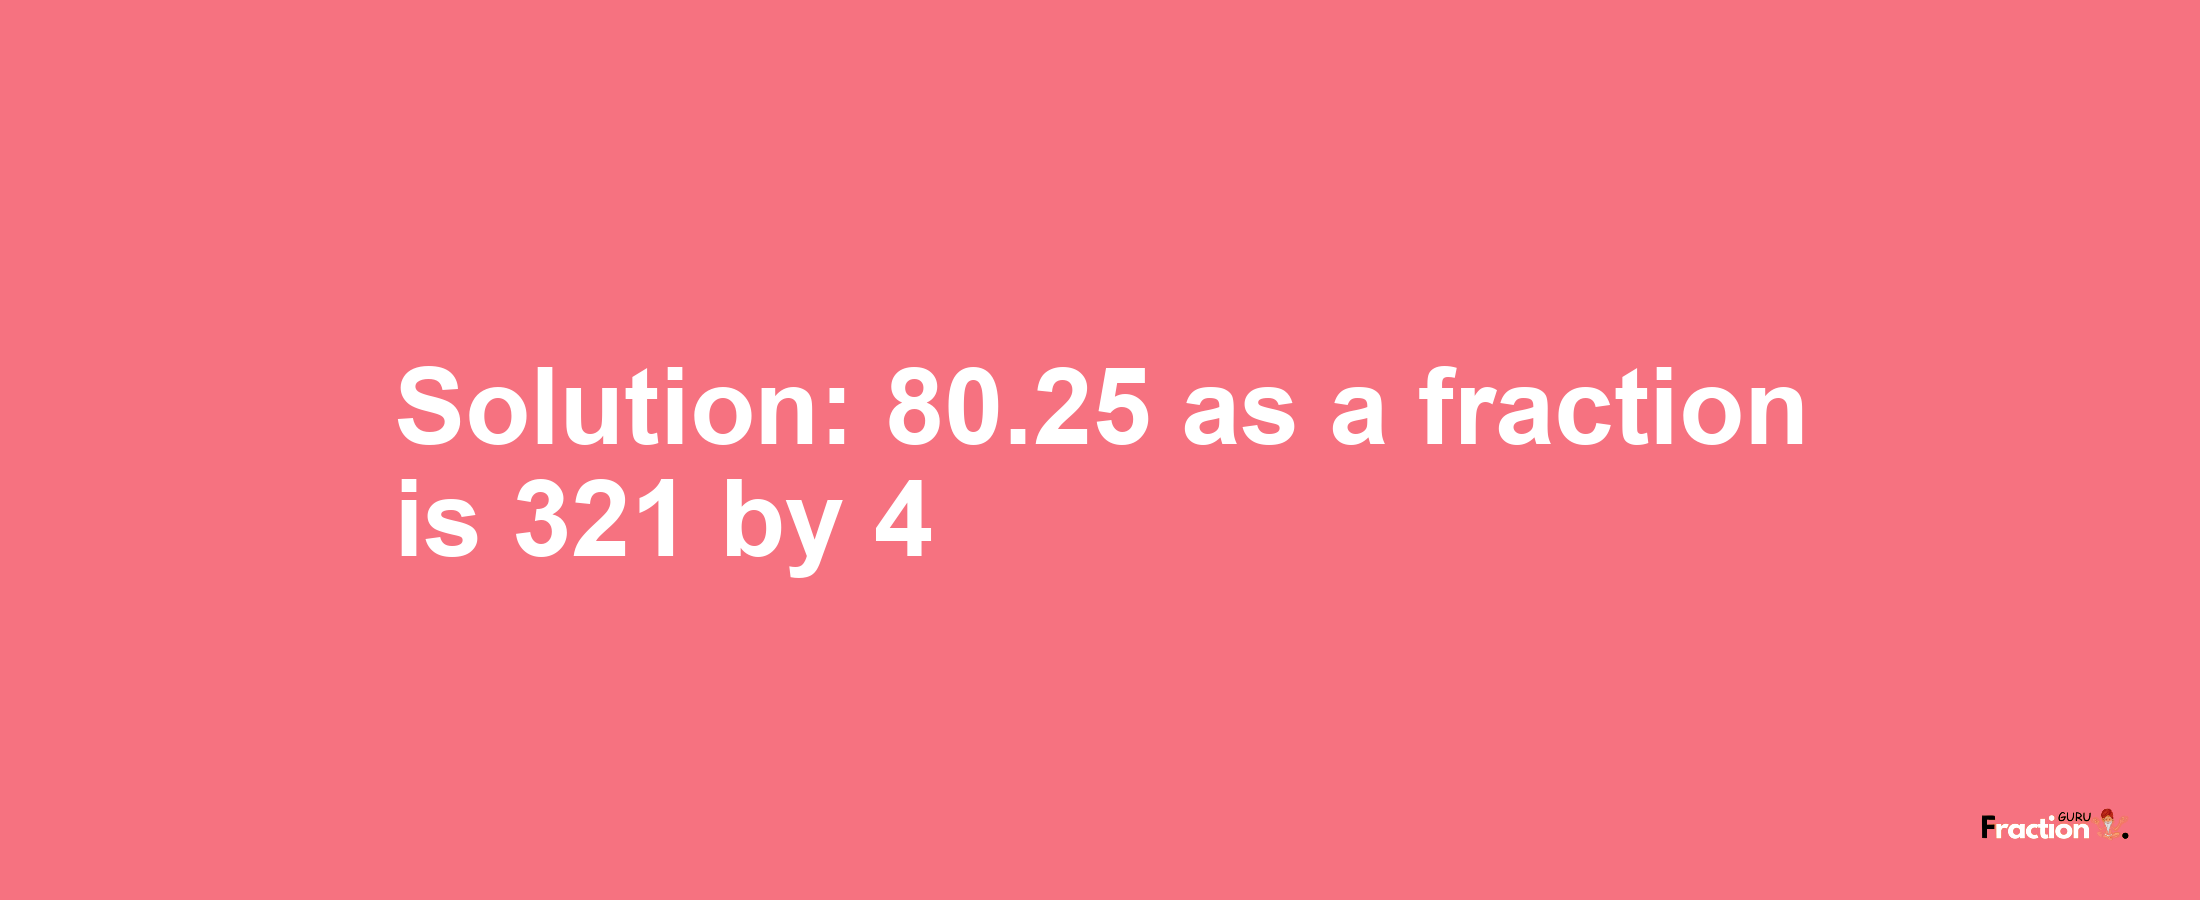 Solution:80.25 as a fraction is 321/4